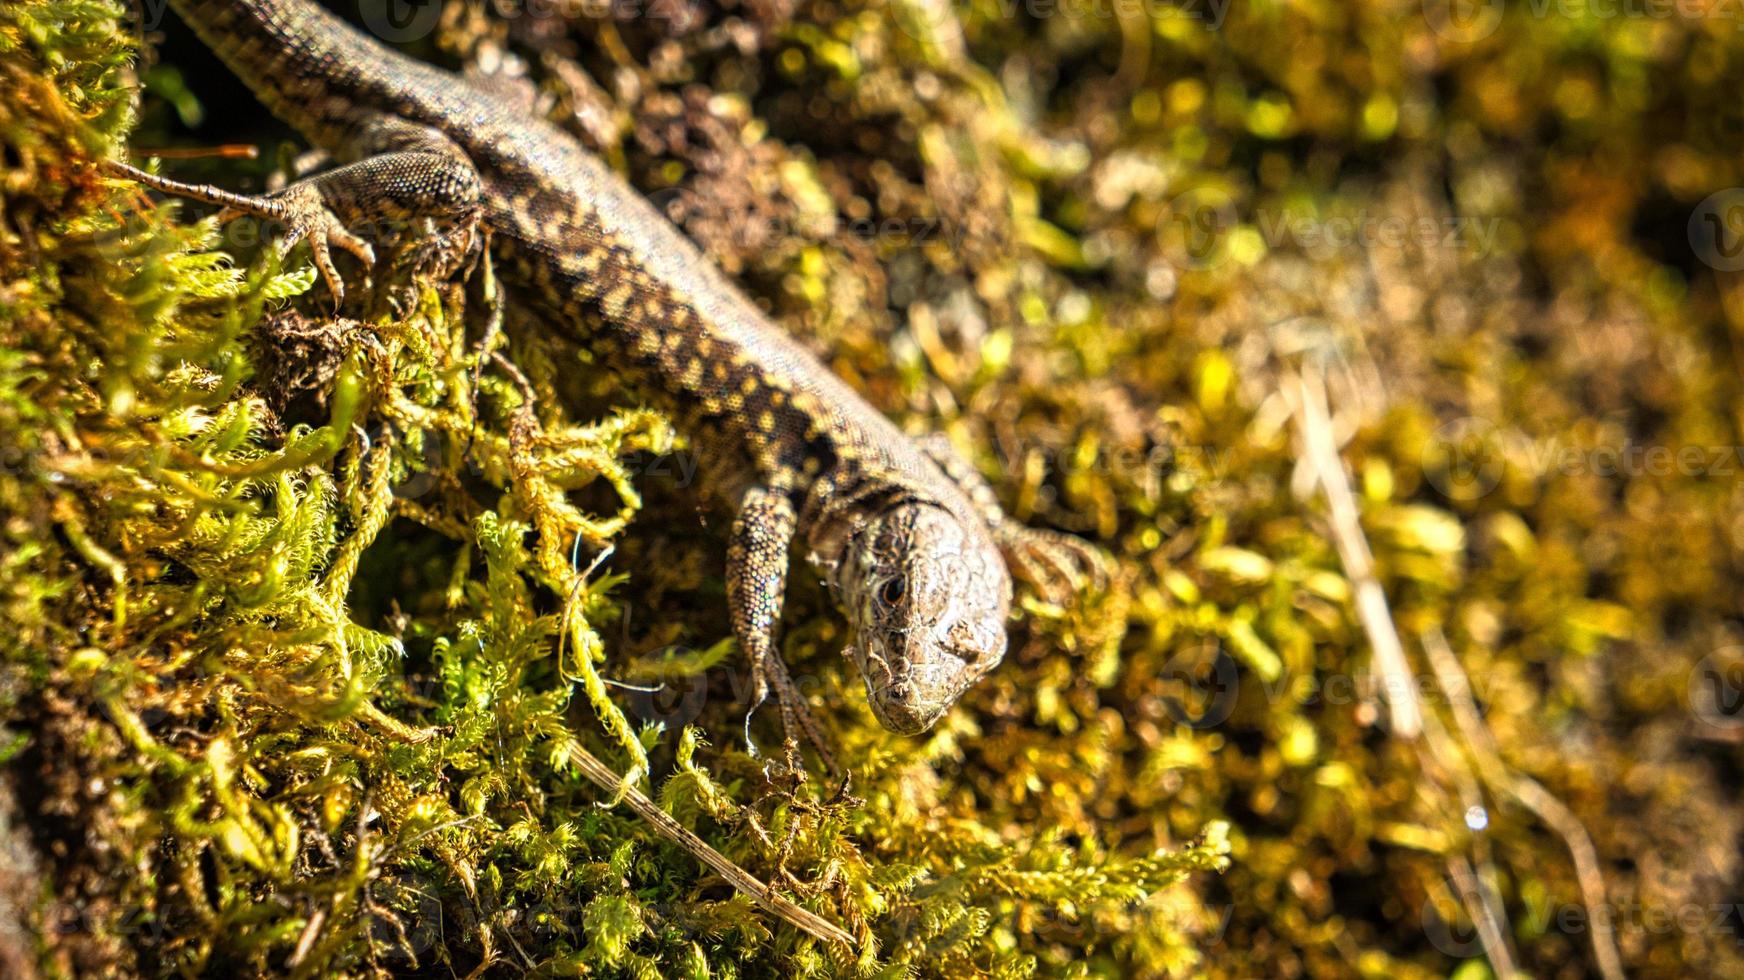 Lizard on a stone wall overgrown with moss. Animal shot of a reptile. photo